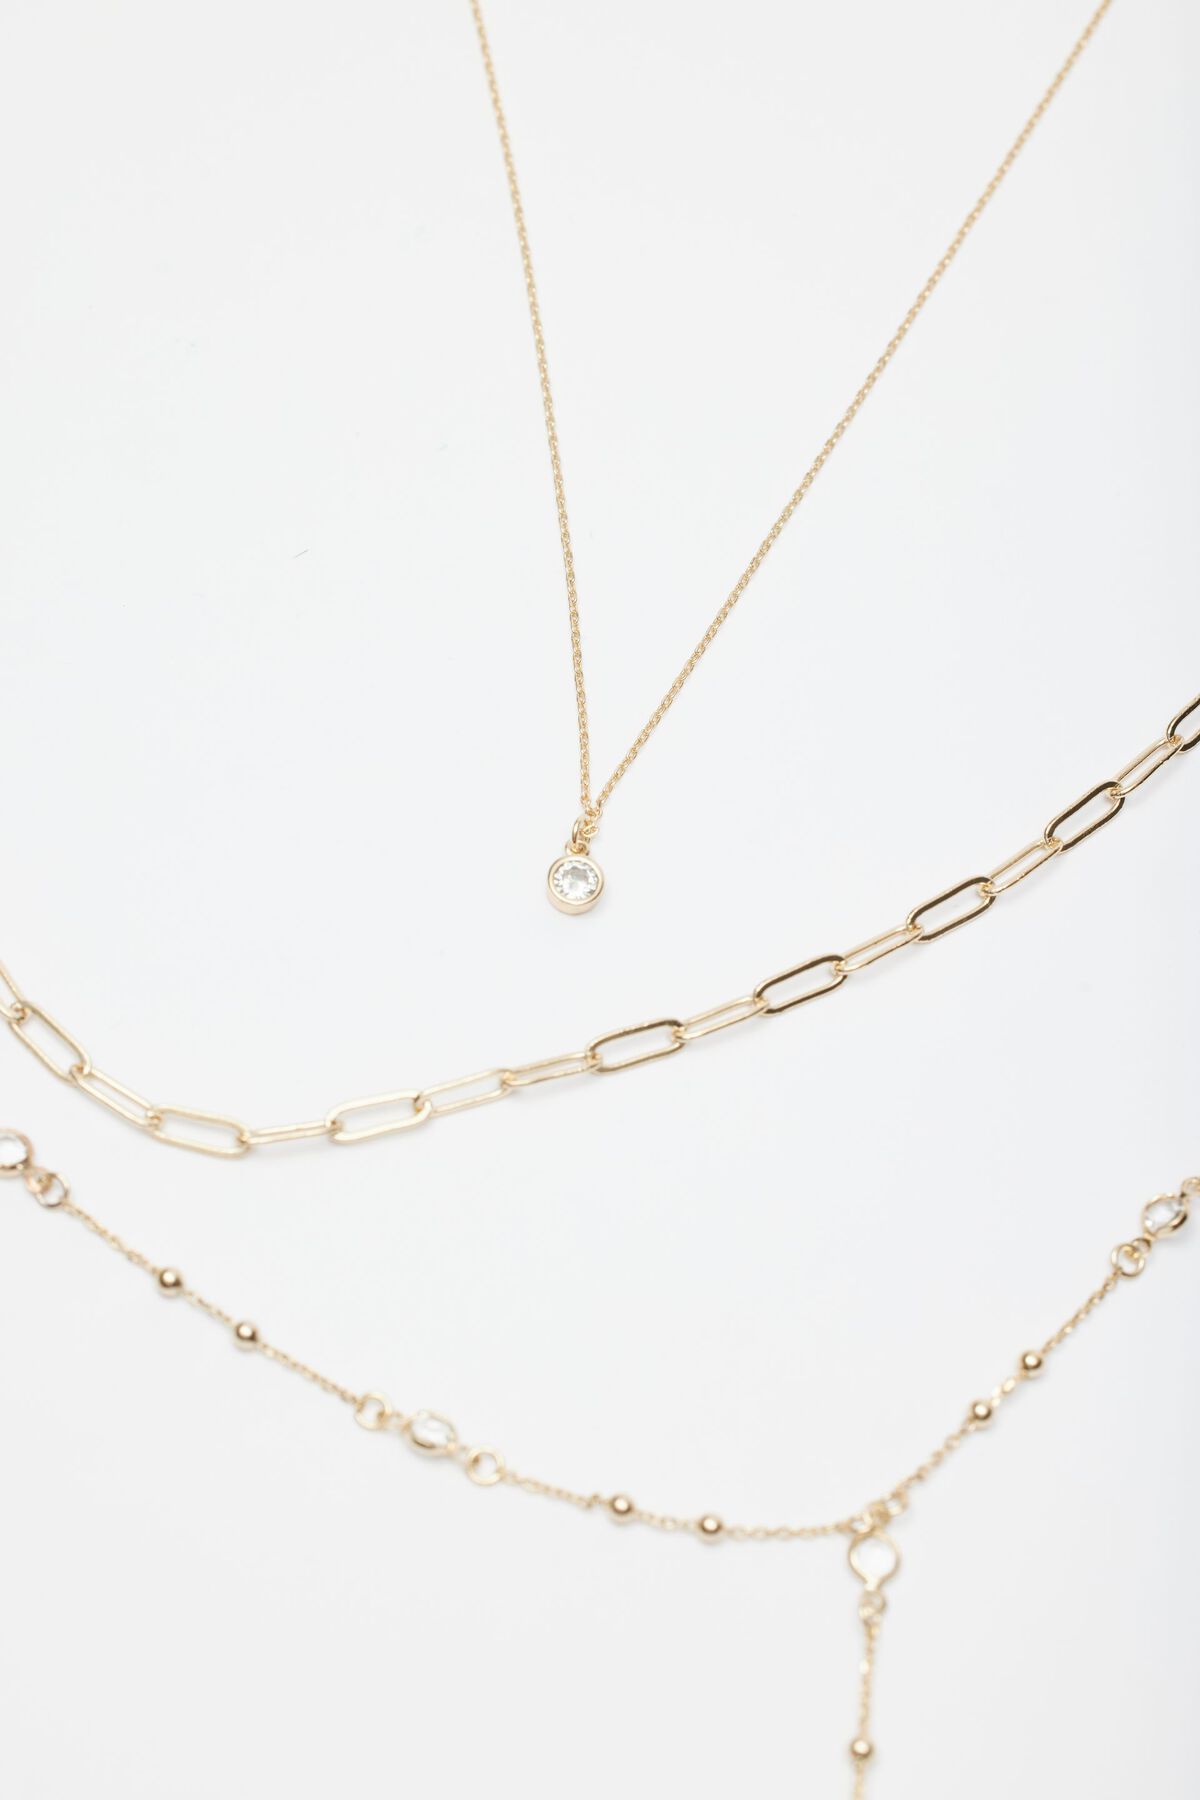 Dynamite Layered Thin, Paperclip & T-Bar Gem Chain Necklace. 3